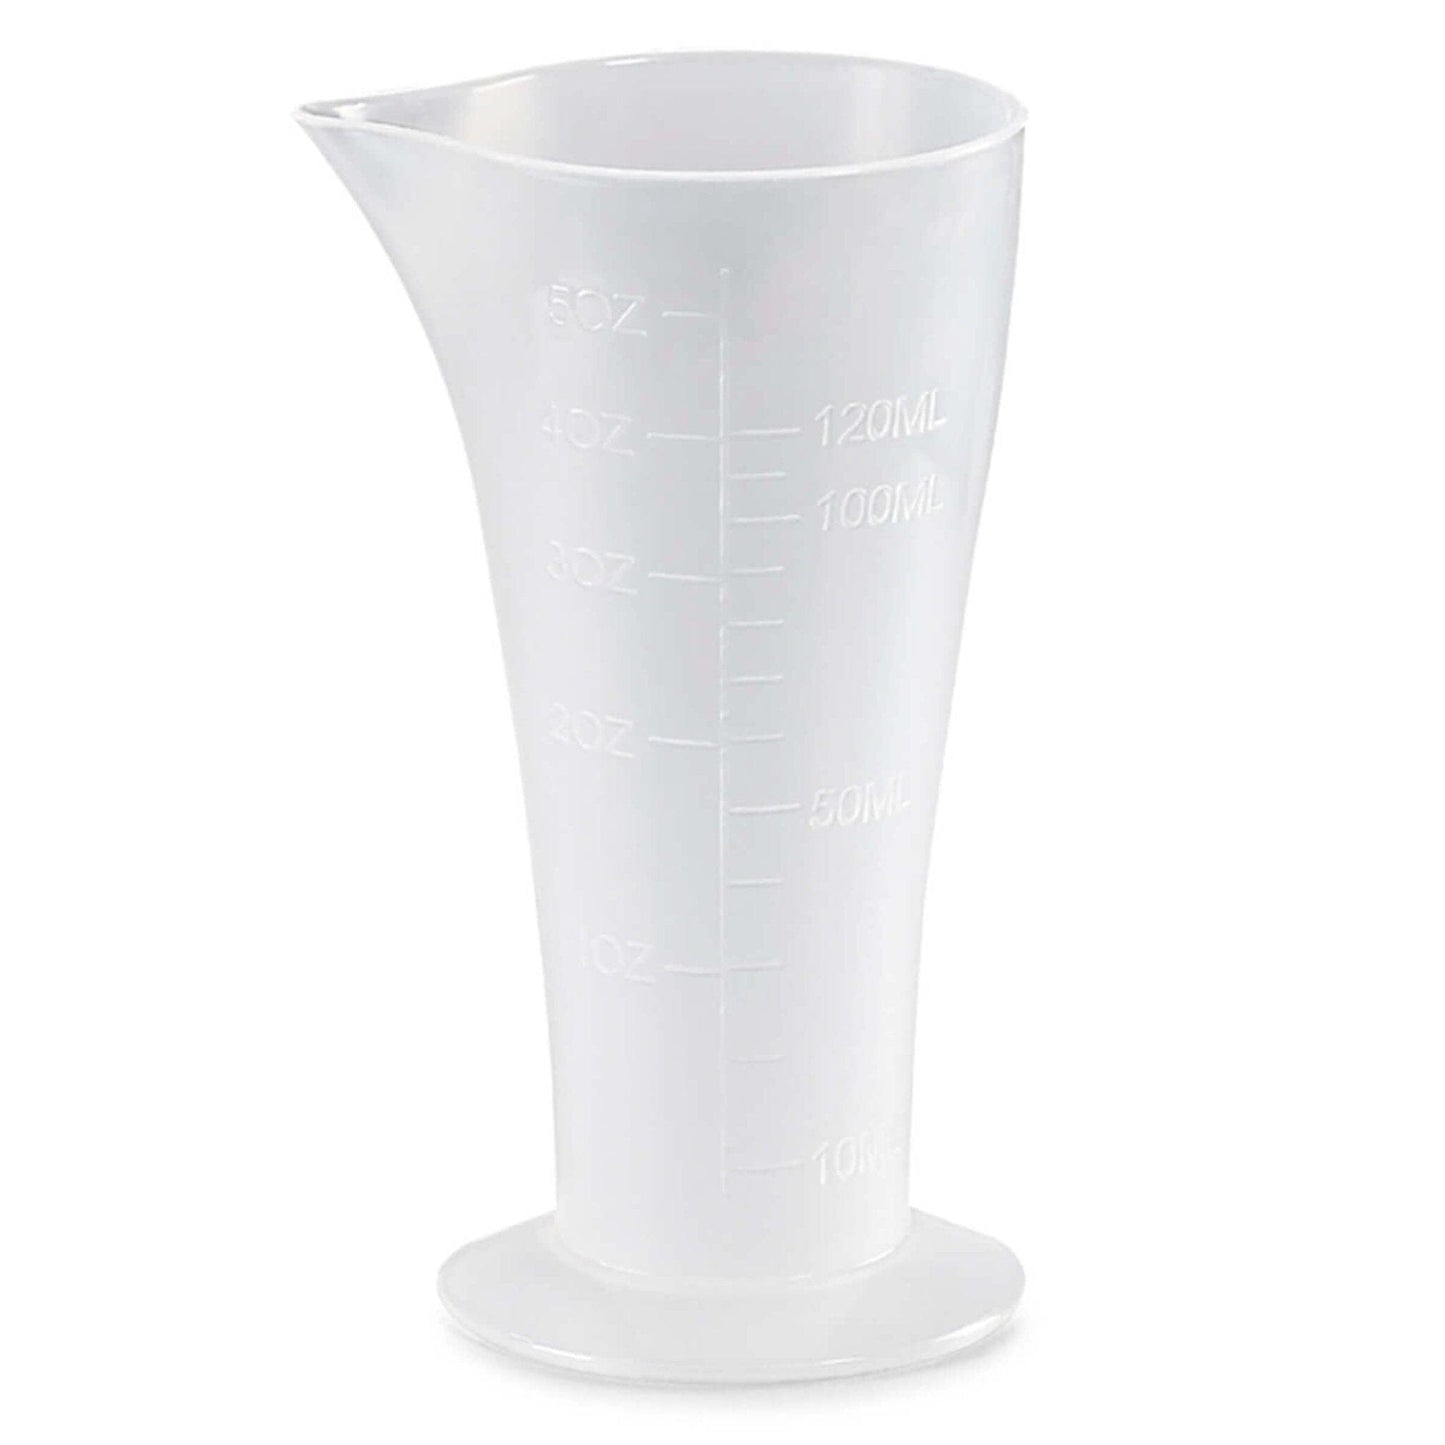 Measuring Beaker | 5oz. | Transparent | Product Club HAIR COLORING ACCESSORIES PRODUCT CLUB 